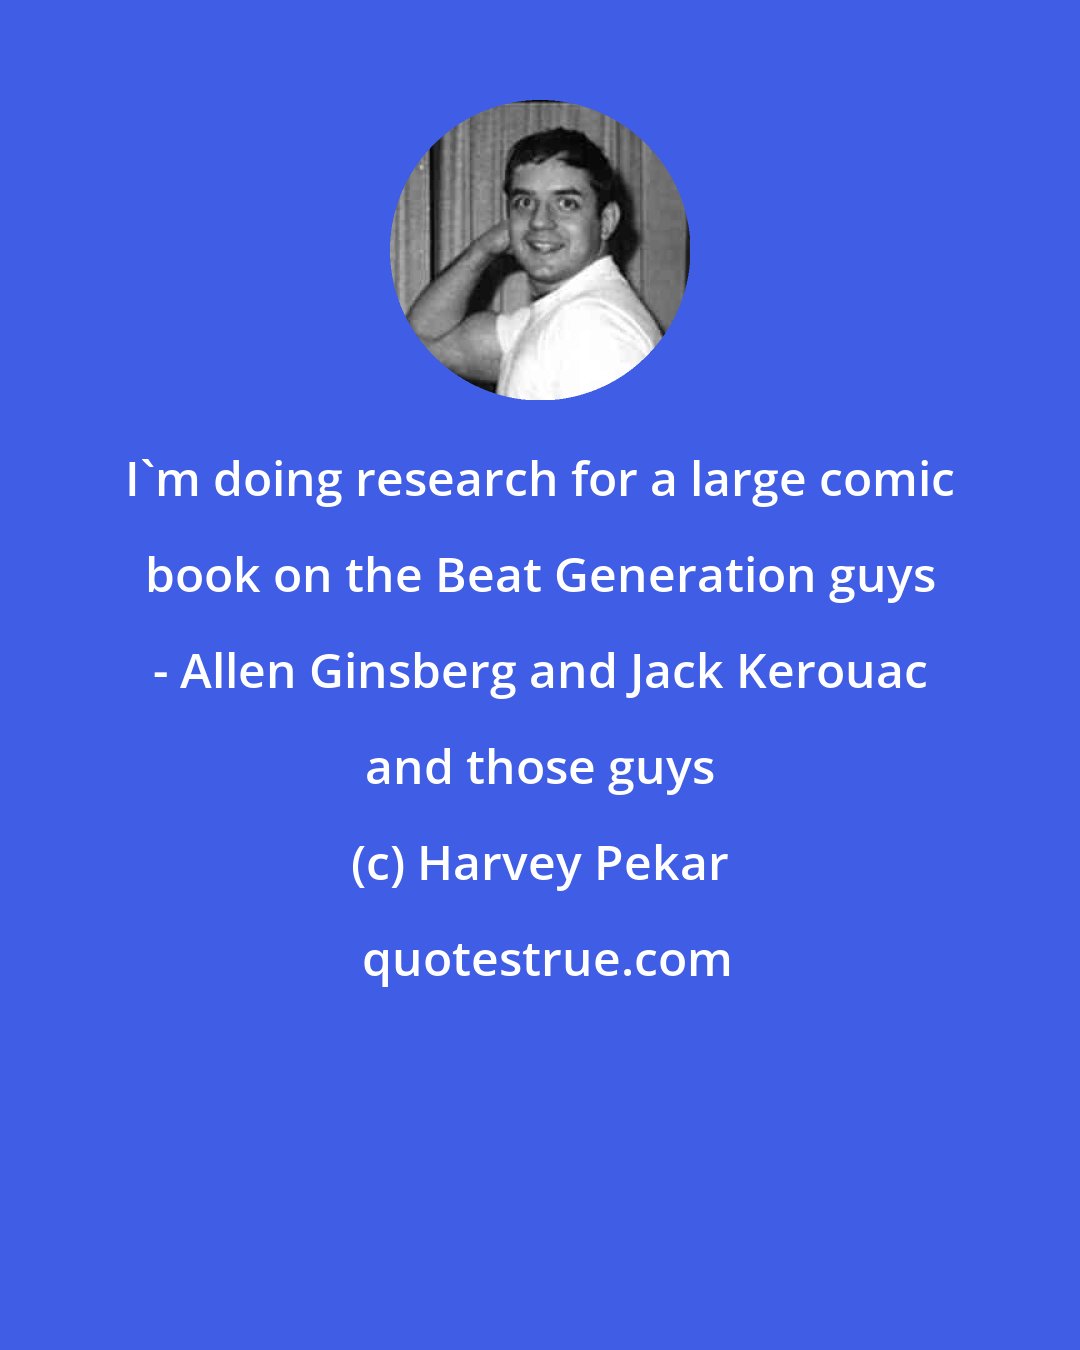 Harvey Pekar: I'm doing research for a large comic book on the Beat Generation guys - Allen Ginsberg and Jack Kerouac and those guys